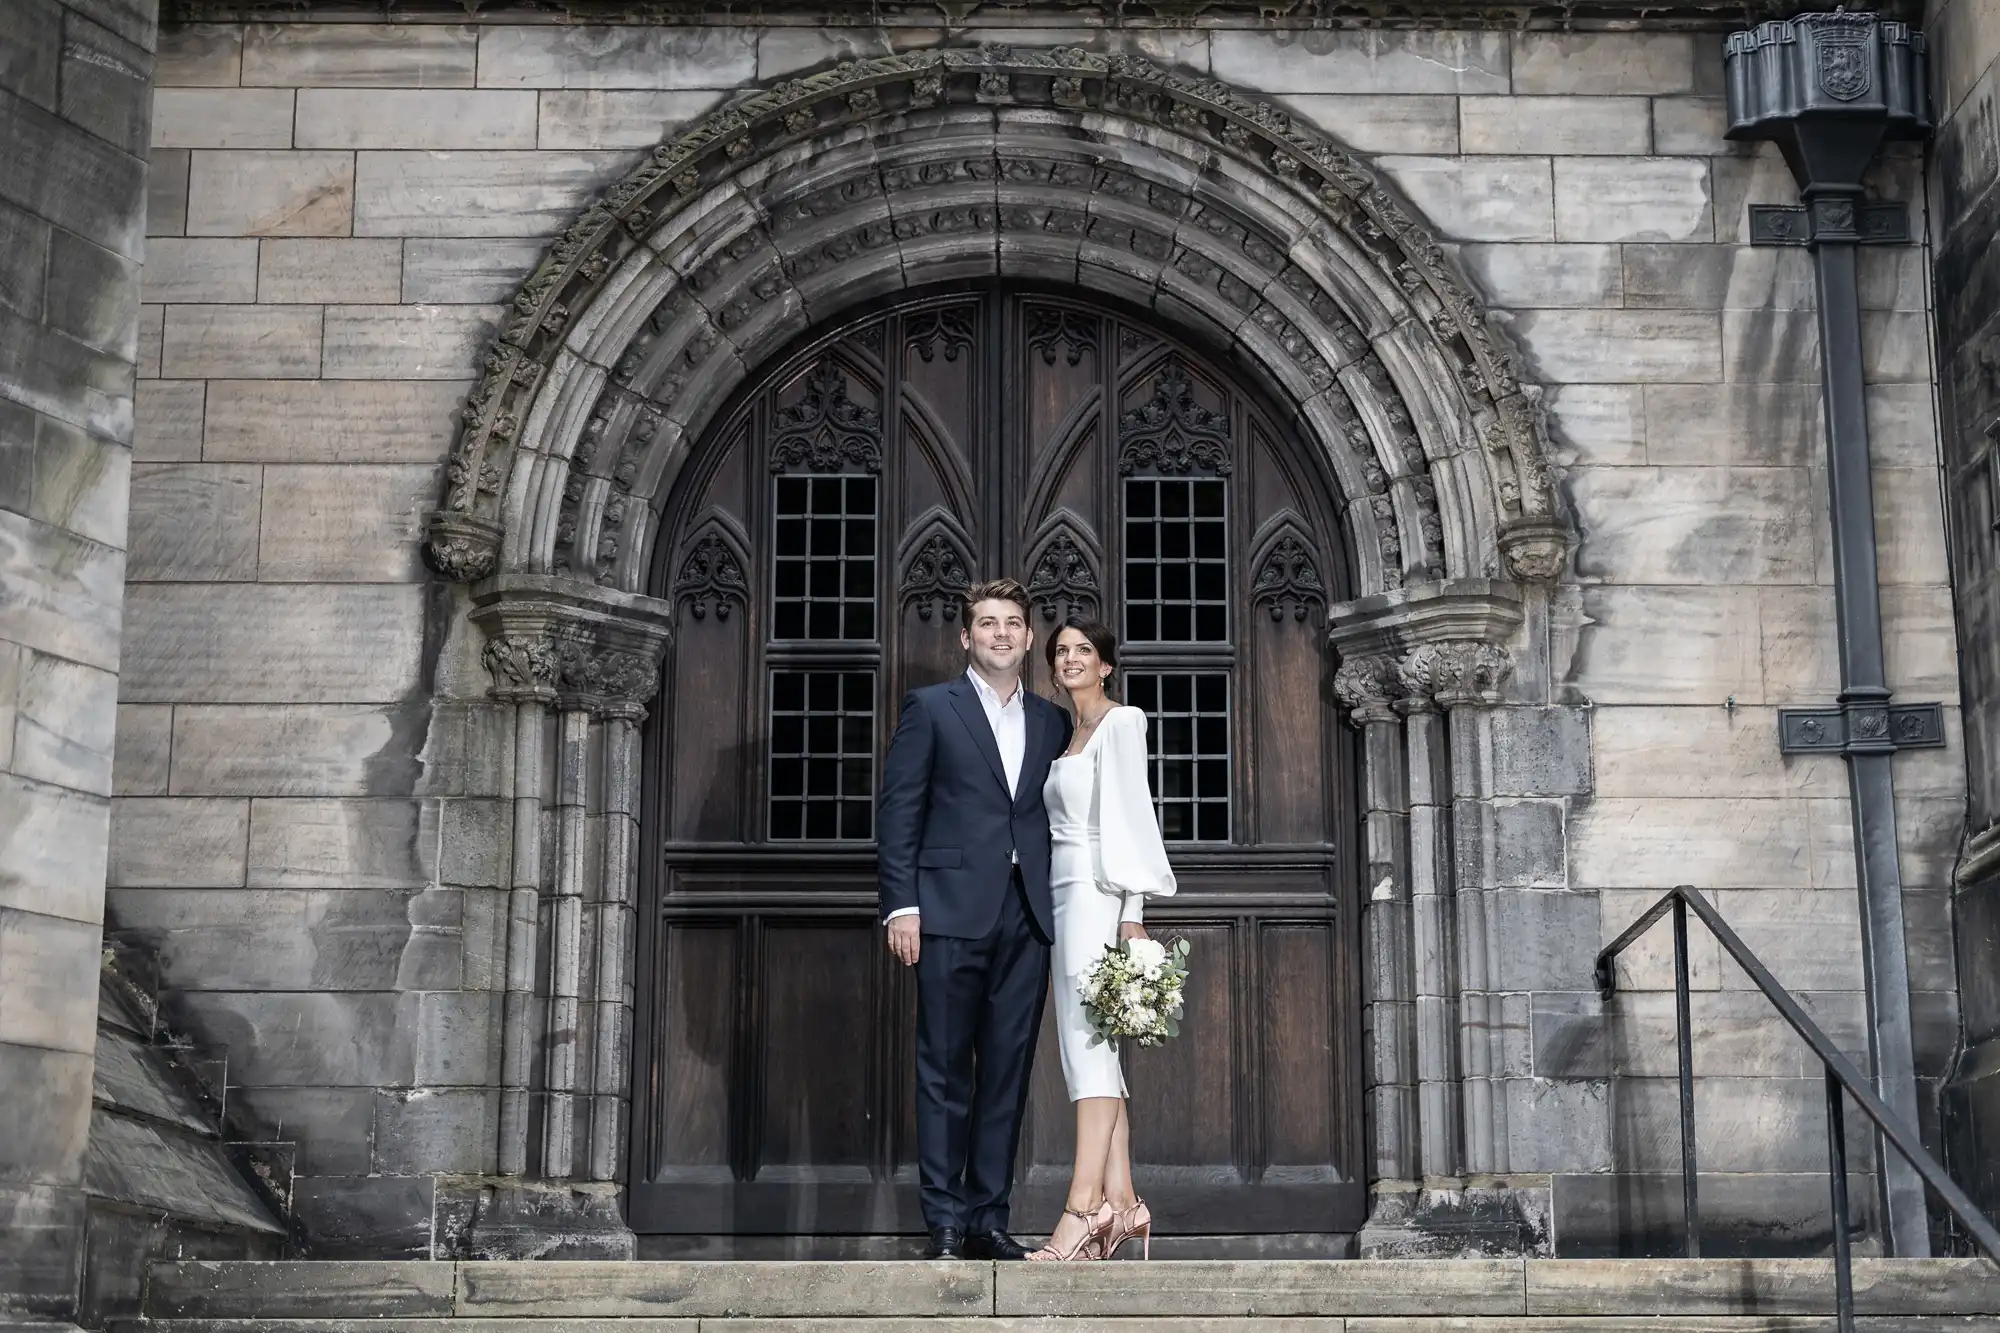 A newlywed couple stands smiling in front of an ornate church doorway, the bride holding a bouquet and both dressed in elegant wedding attire.